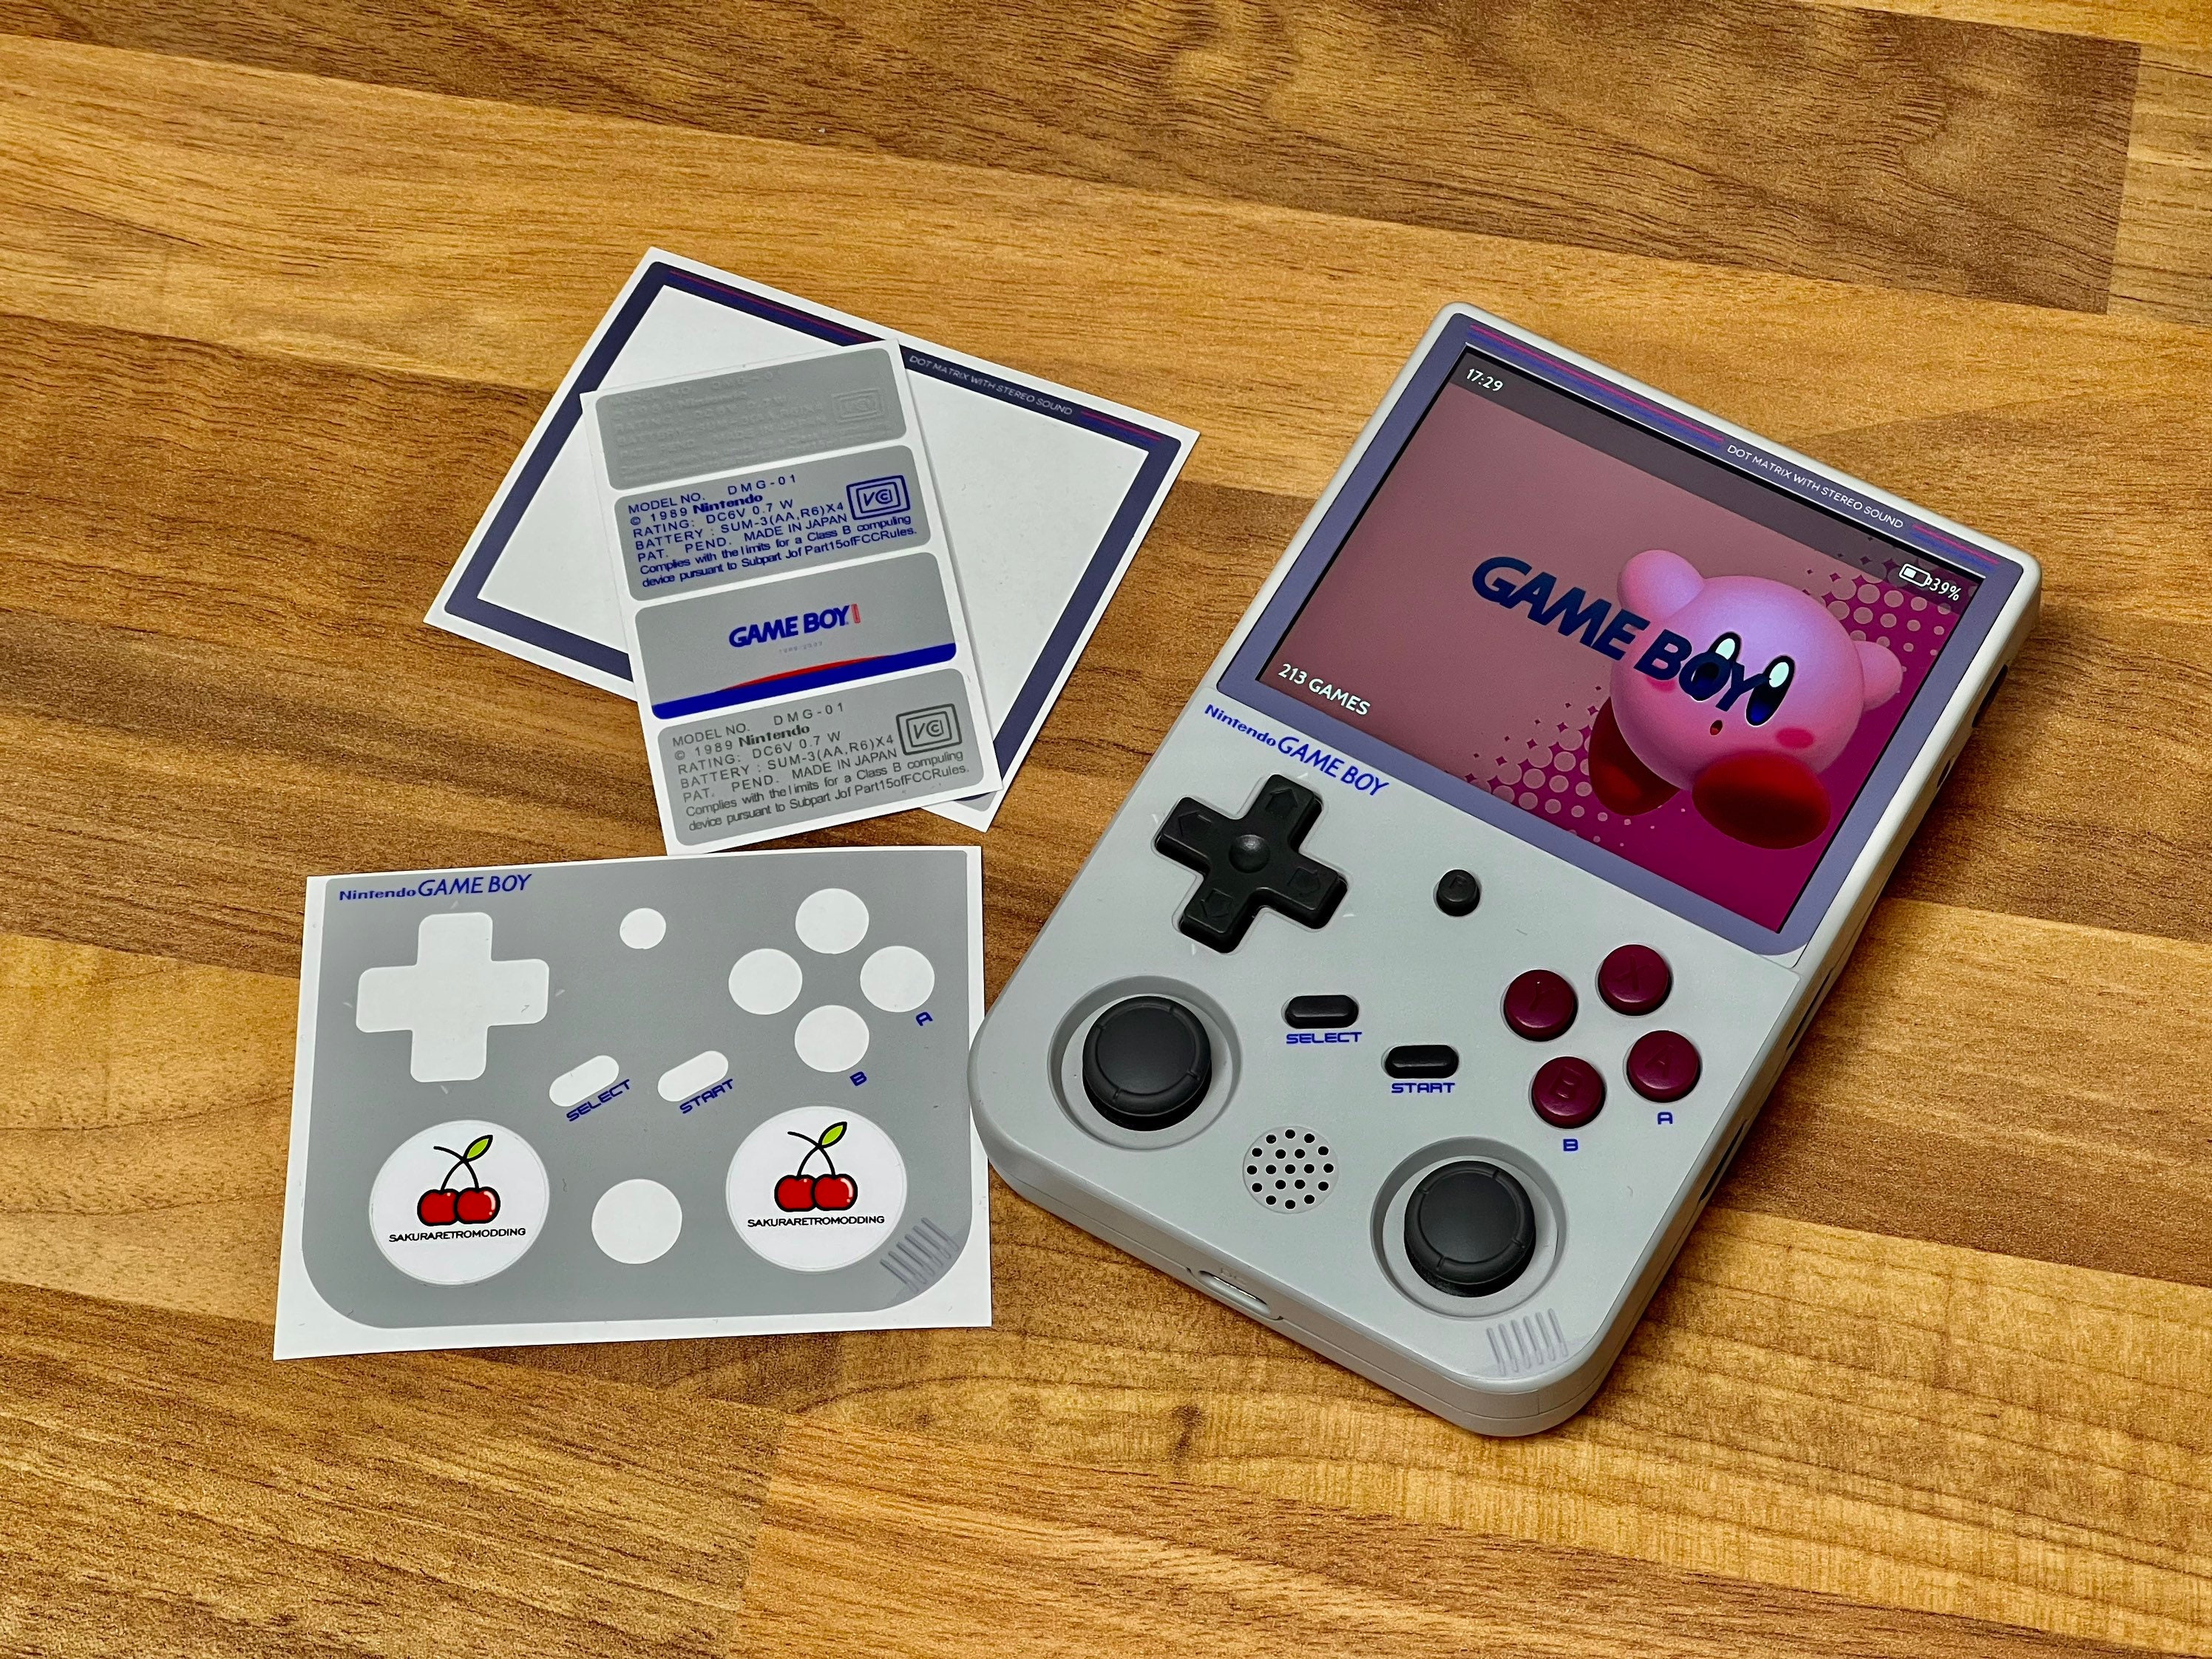 Overskyet Leia sikkerhed Pre Order Shipped the 21 August. RG353V Gameboy DMG Stickers - Etsy